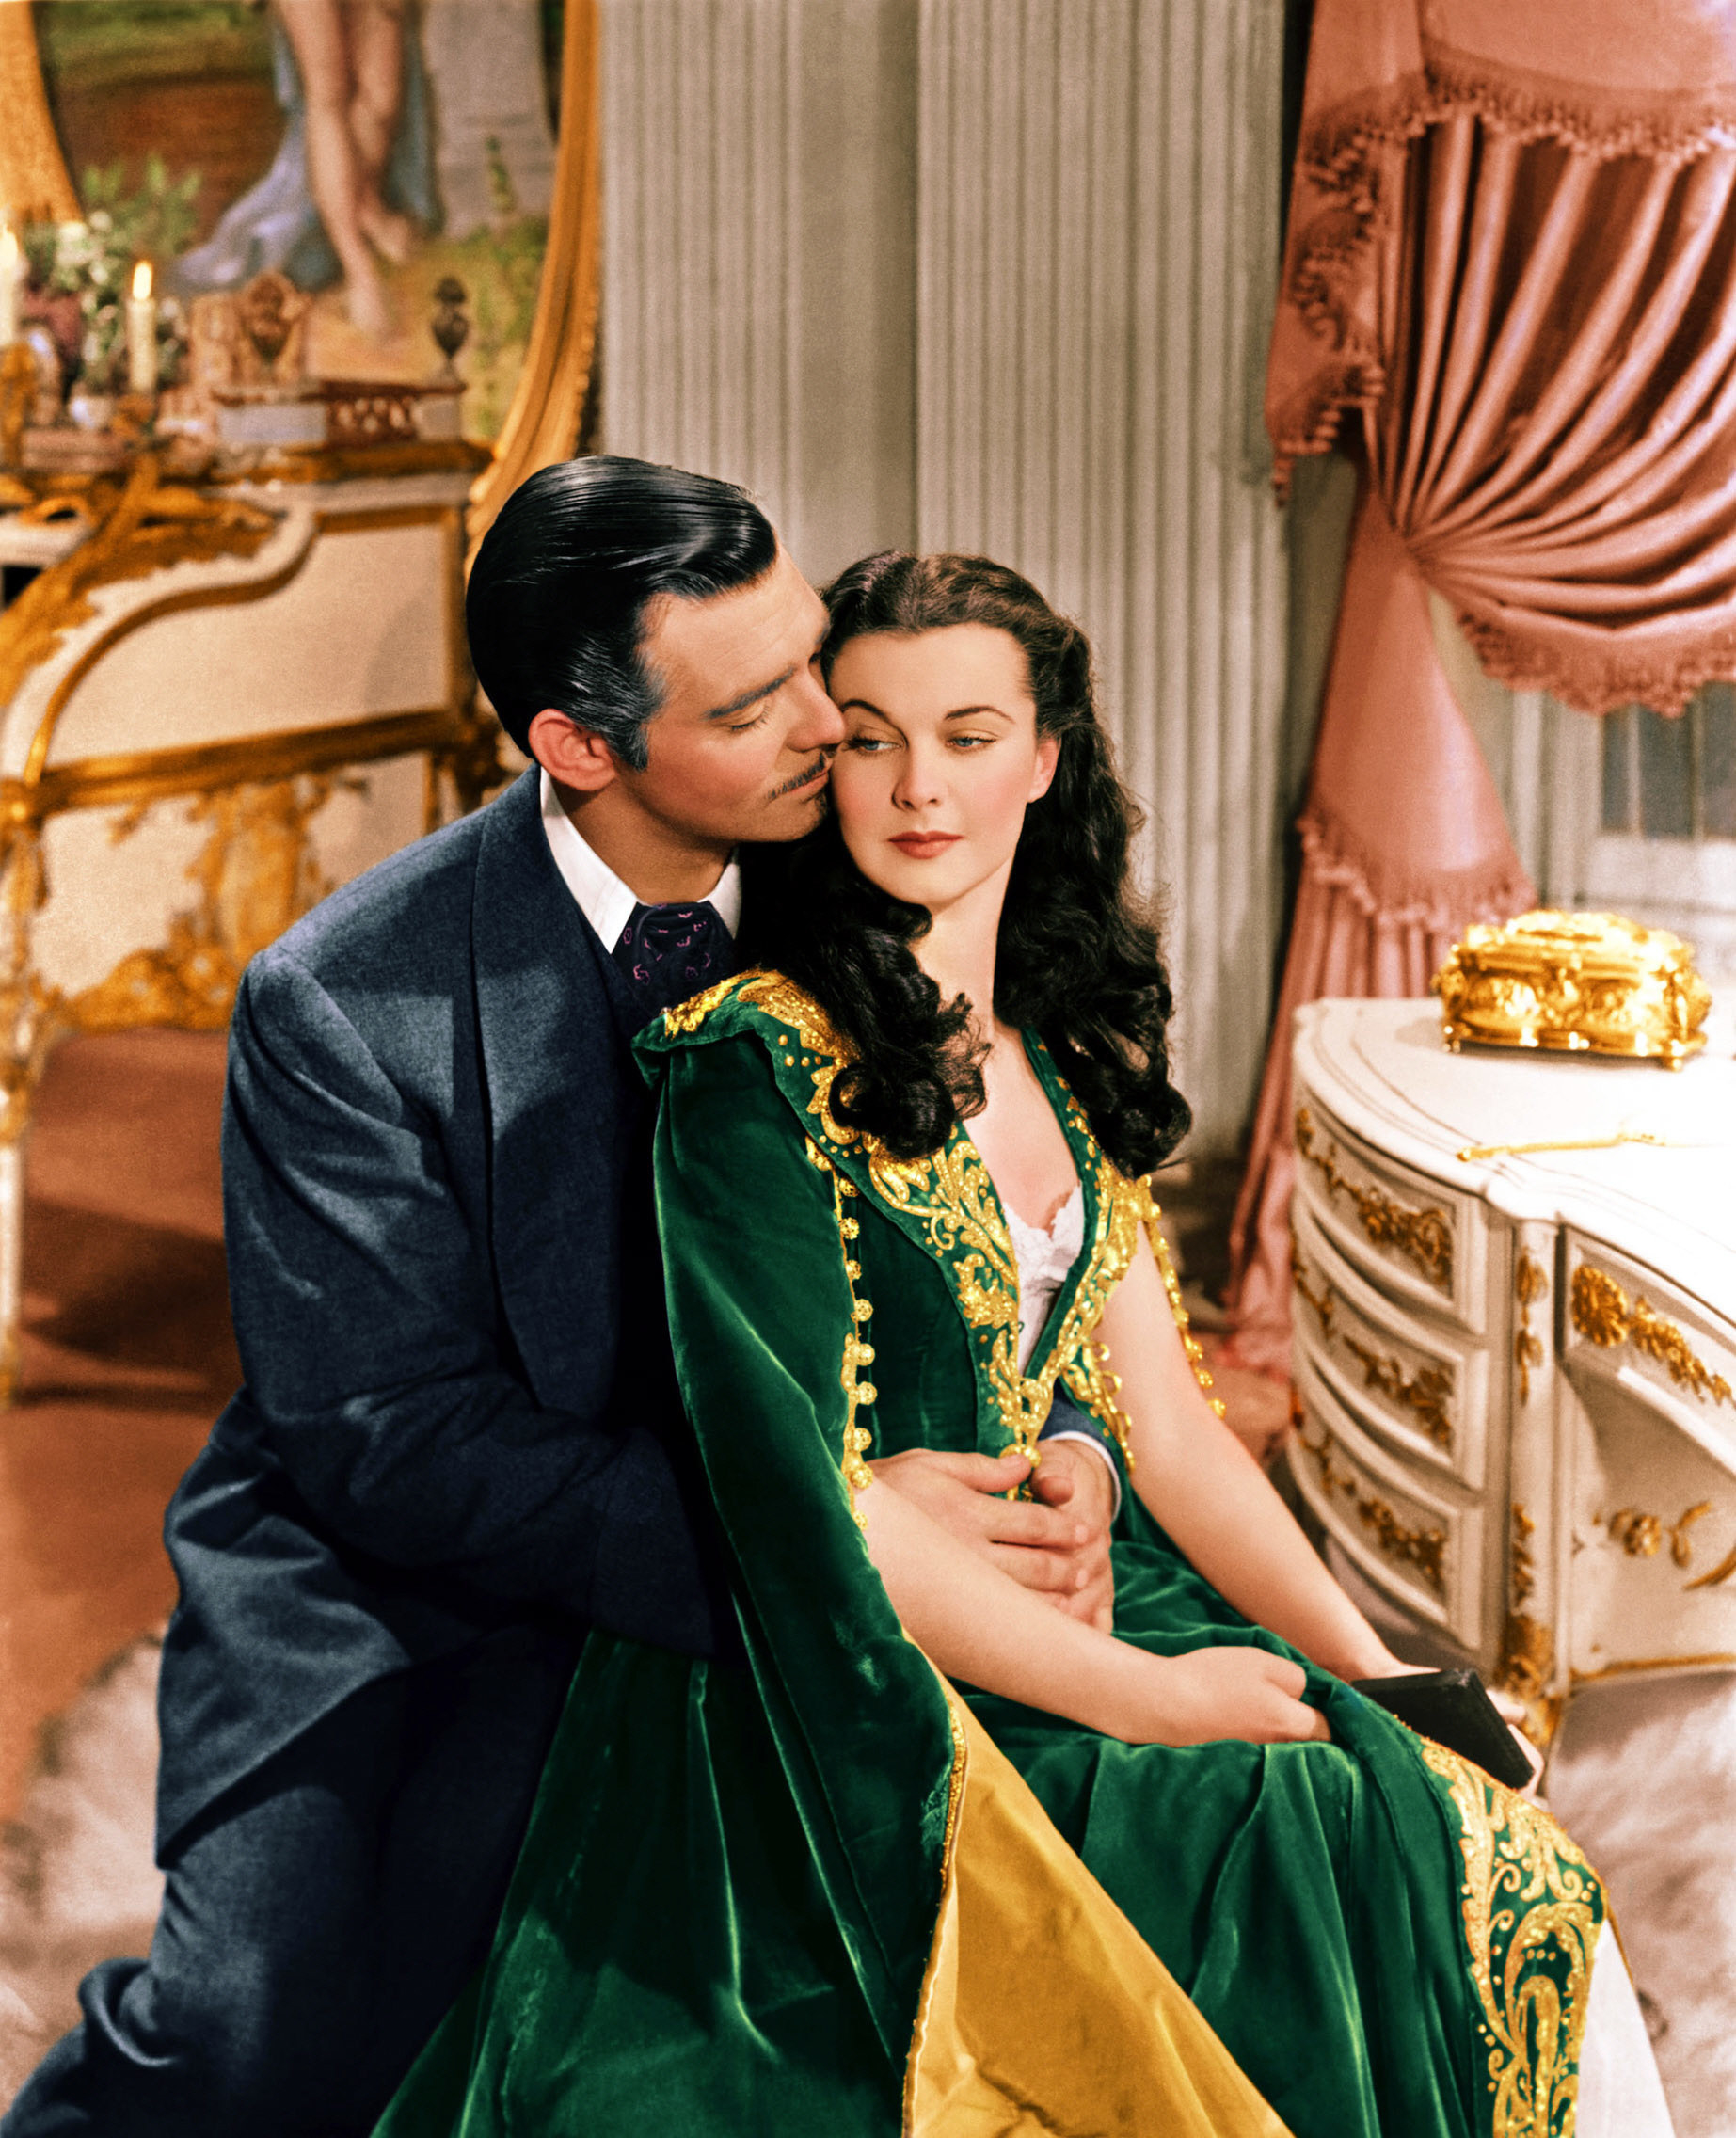 A couple from Gone With the Wind embraces, while wearing Gilded Age clothes